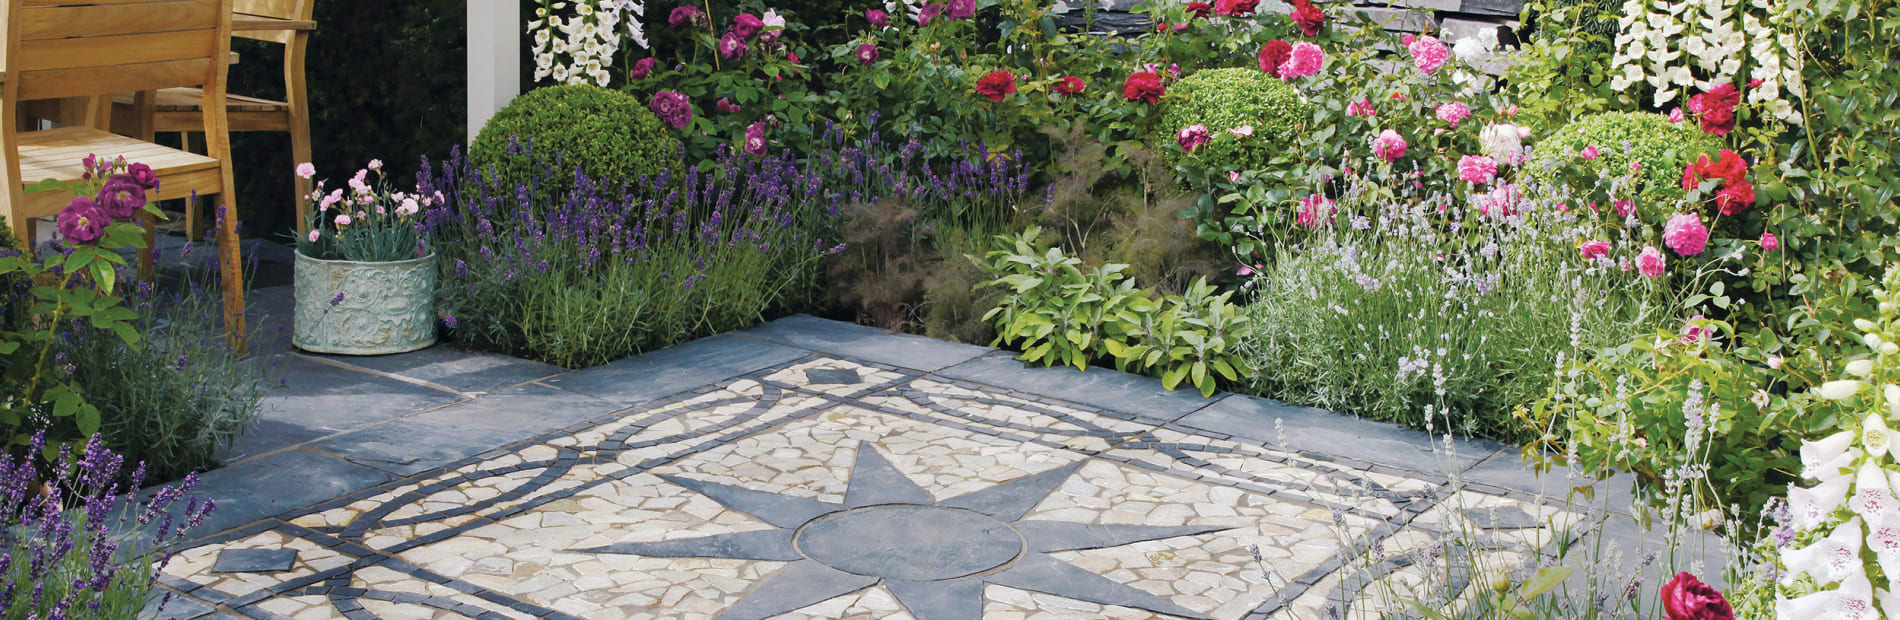 mosaic paving in a star